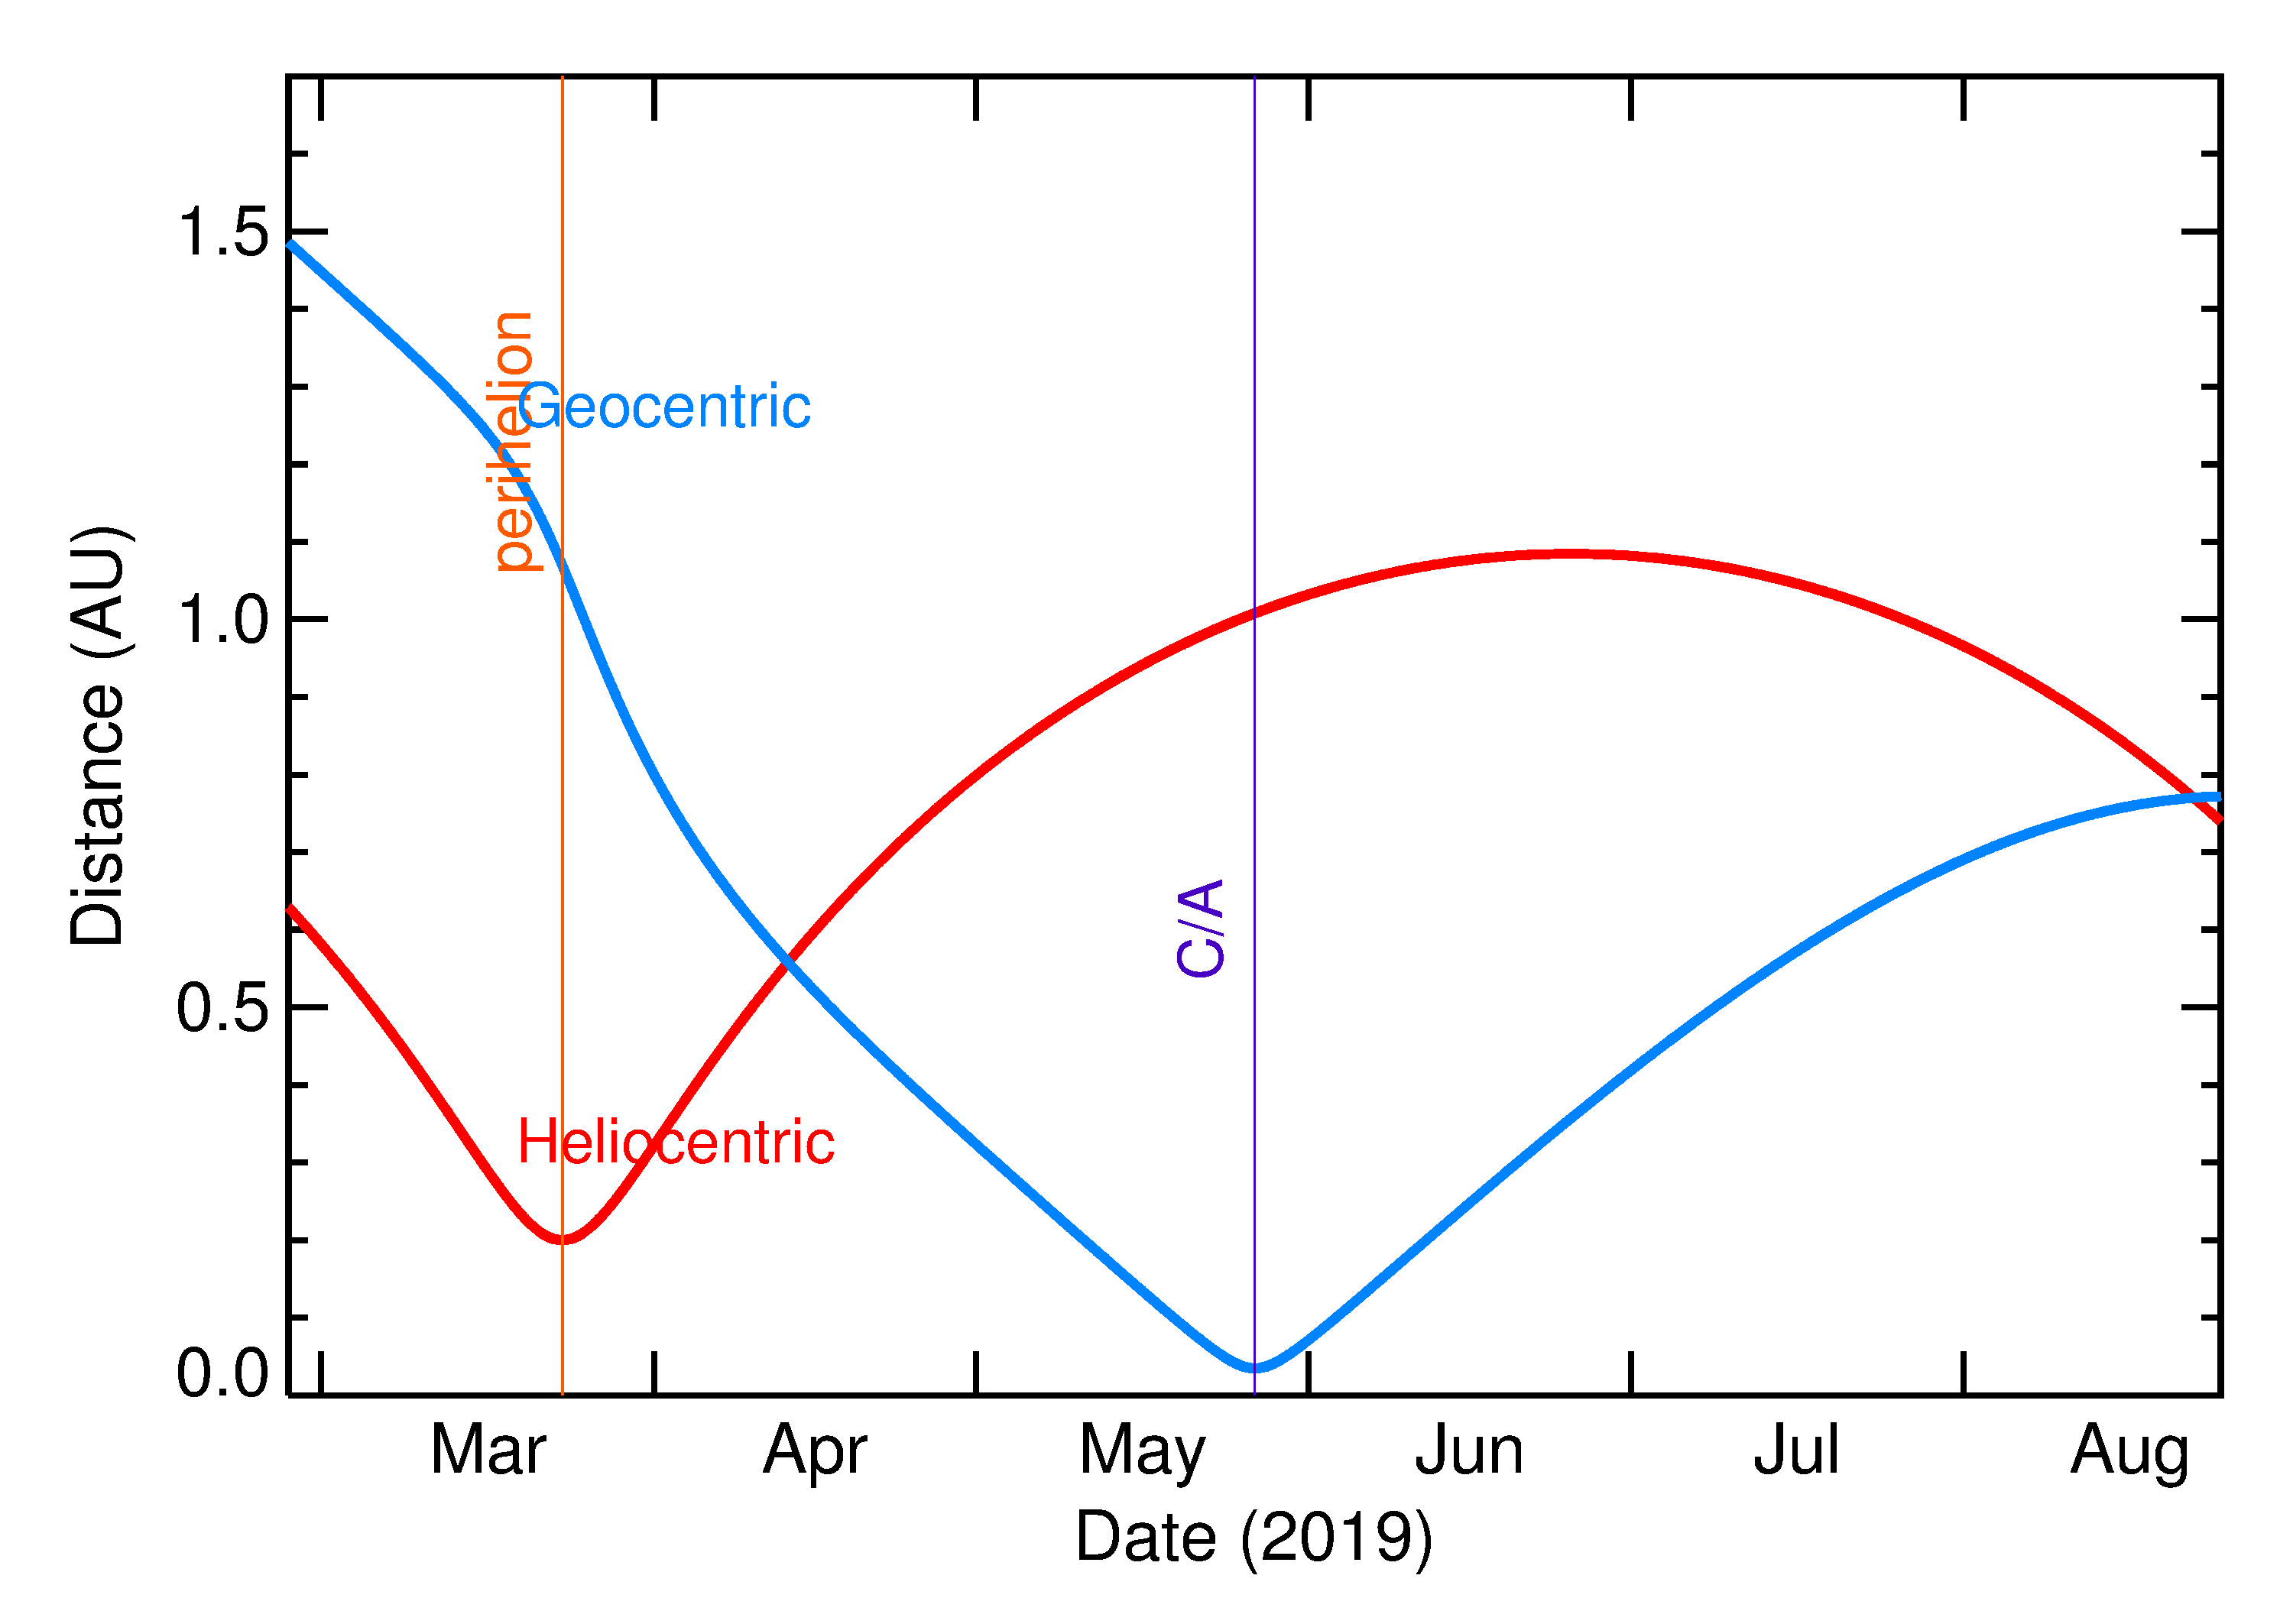 2019 Plot of Heliocentric and Geocentric Distances